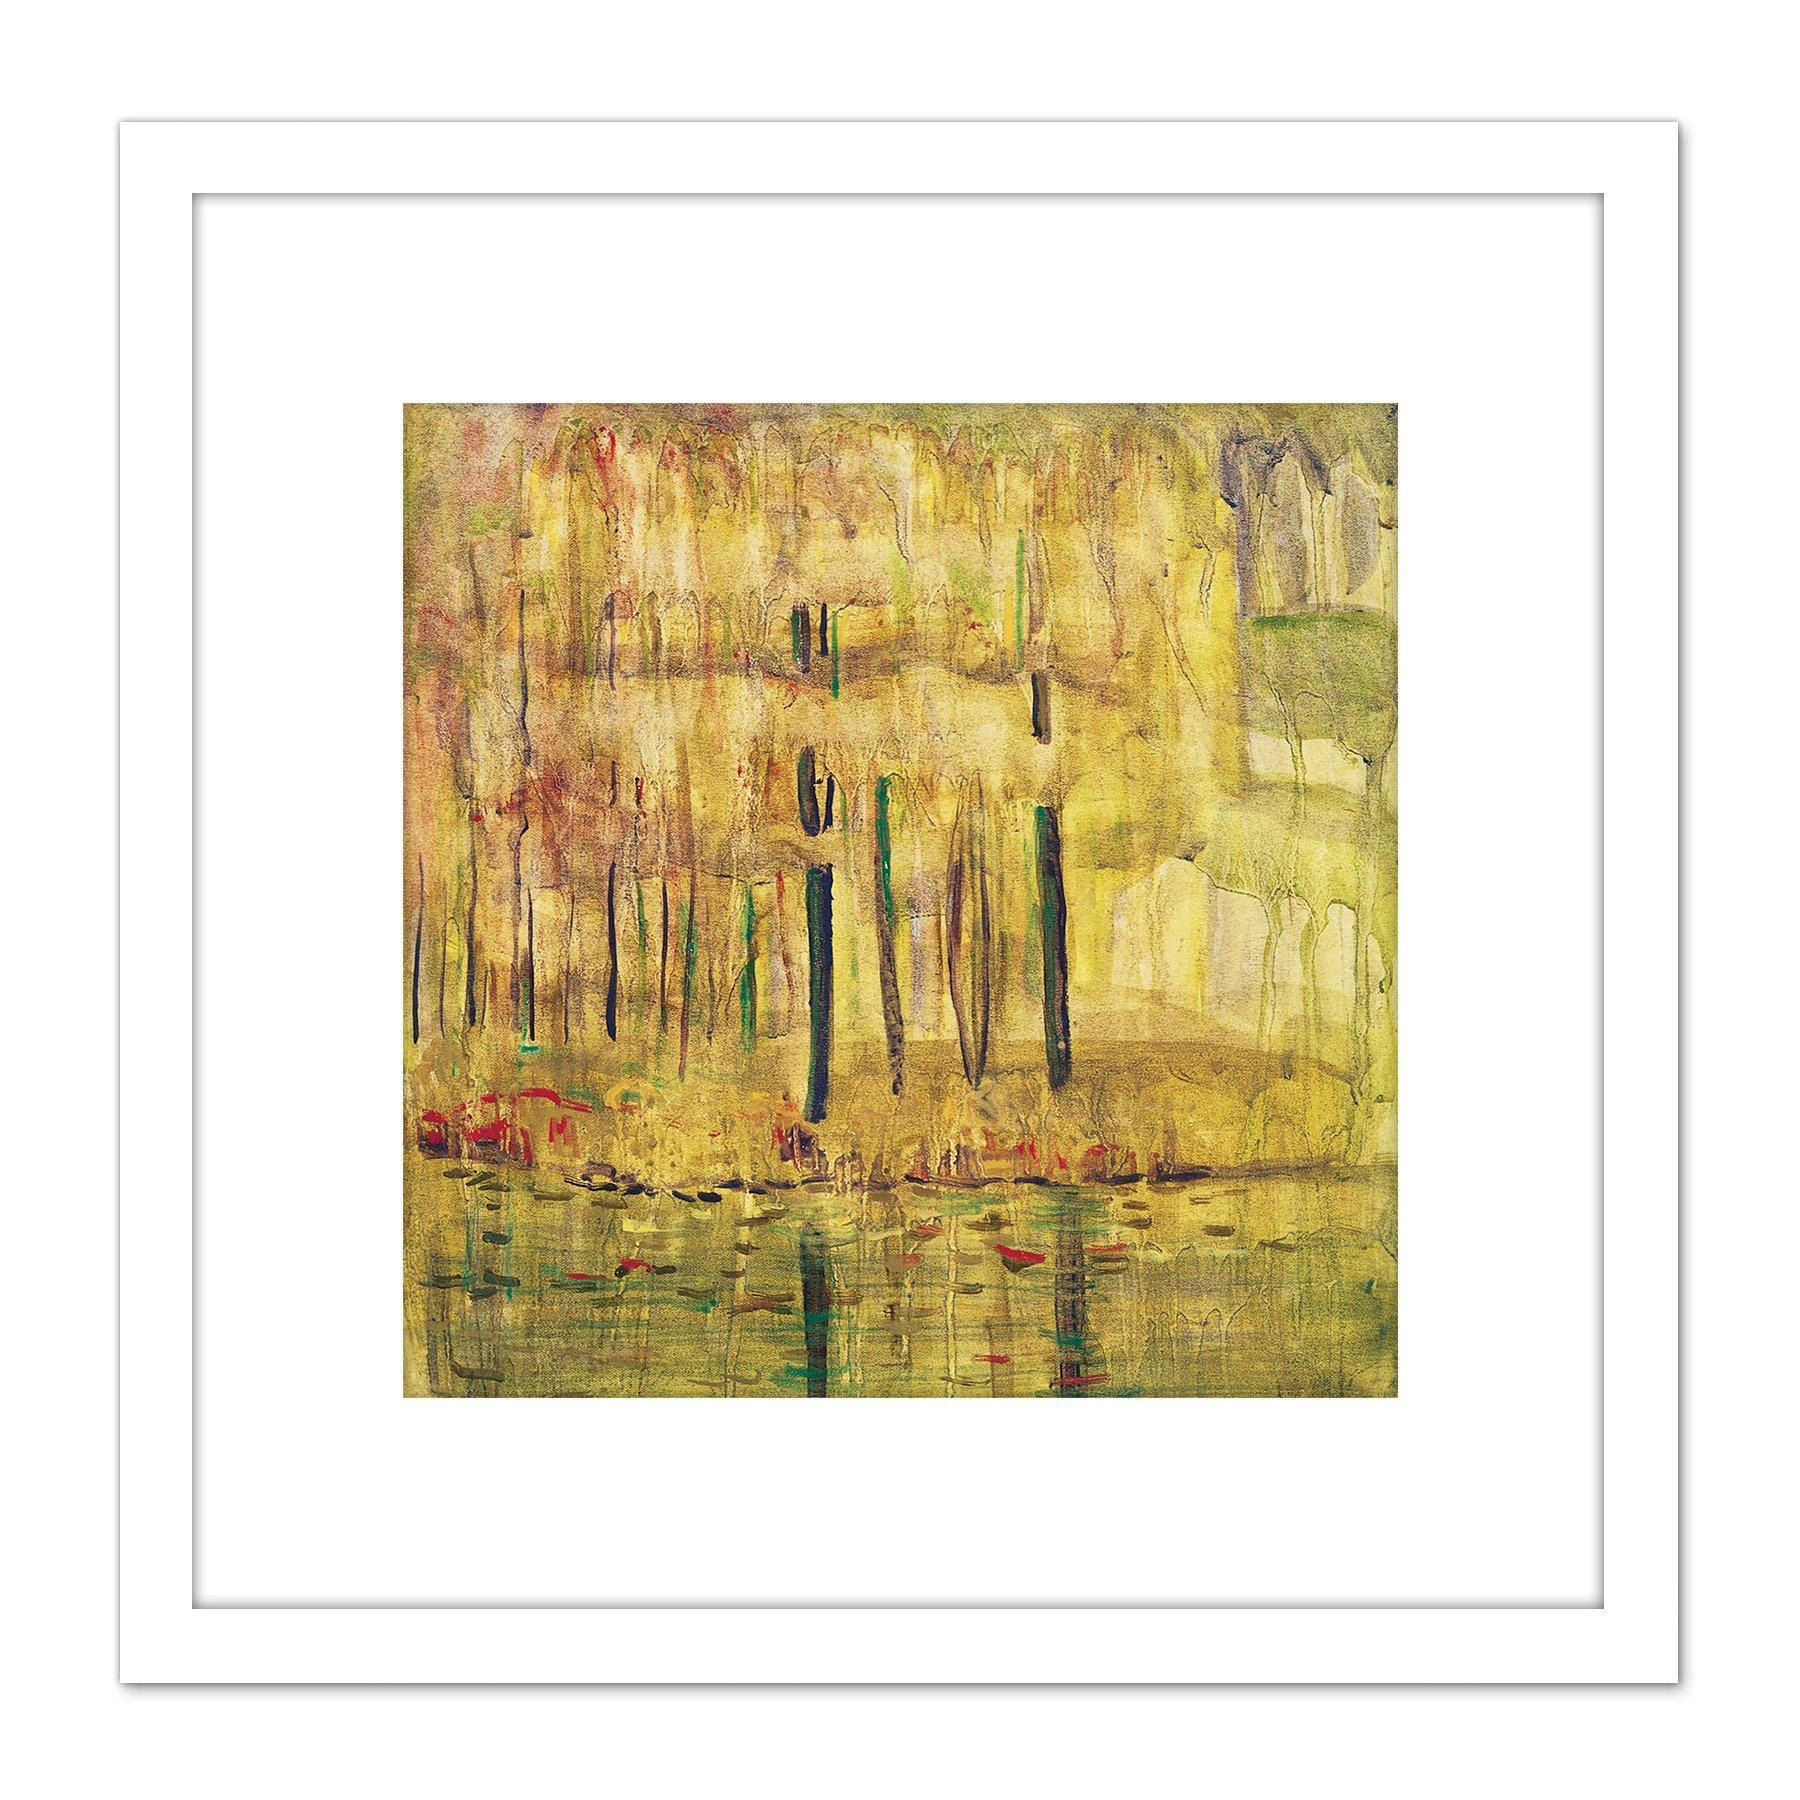 Ciurlionis Etude Study Symbolist Painting 8X8 Inch Square Wooden Framed Wall Art Print Picture with Mount - image 1